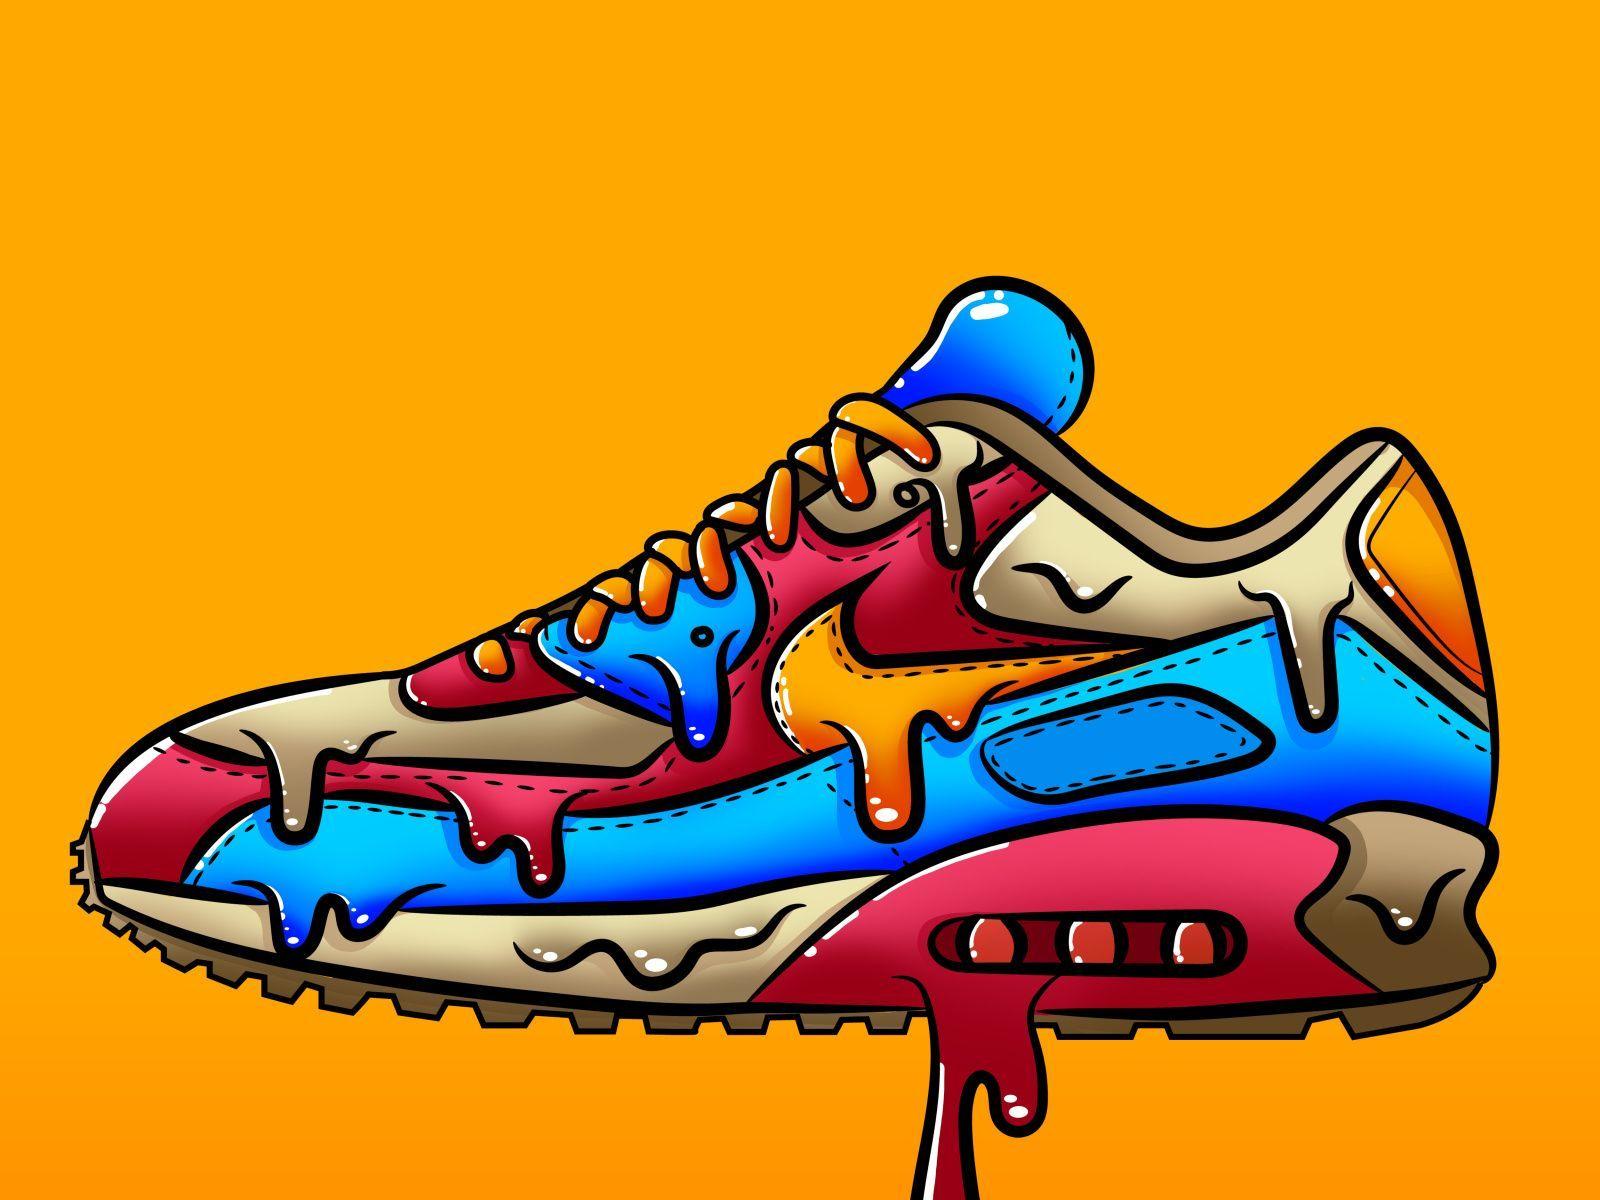 Pin by Alex on Shoe wallpapers  Sneakers wallpaper Shoes wallpaper  Sneakers illustration